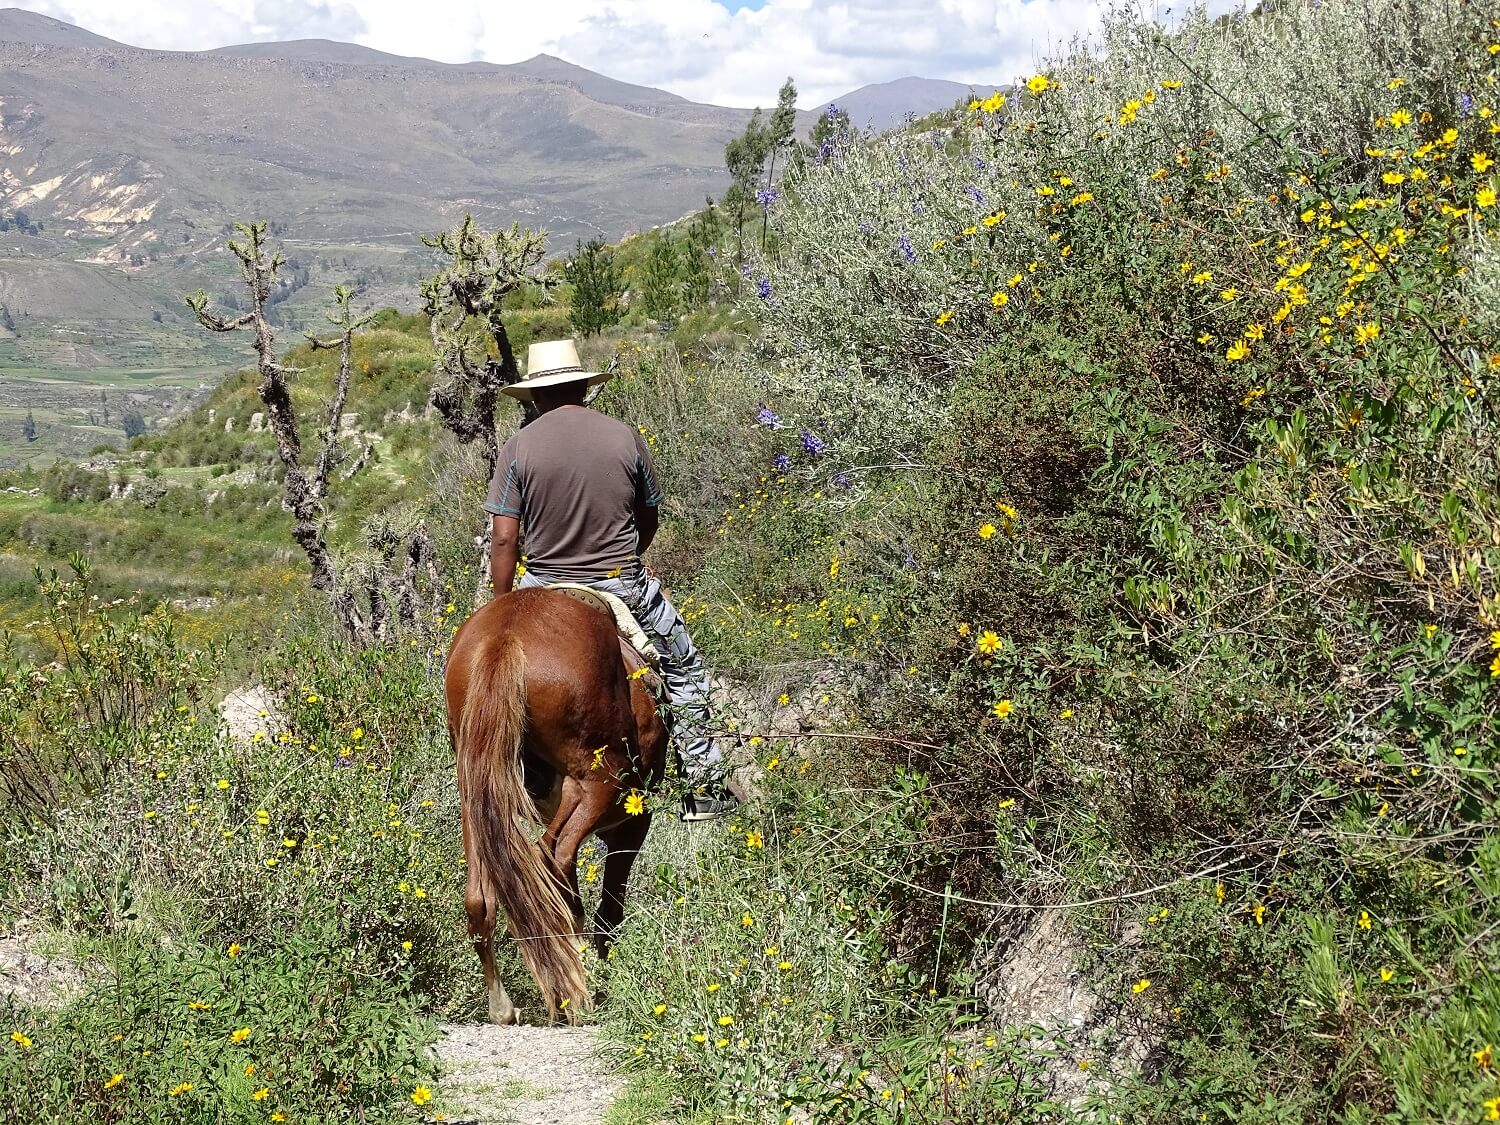 11Horseriding from Coporaque in the Colca Canyon, Peru, as part of a homestay programme with RESPONSible Travel Peru